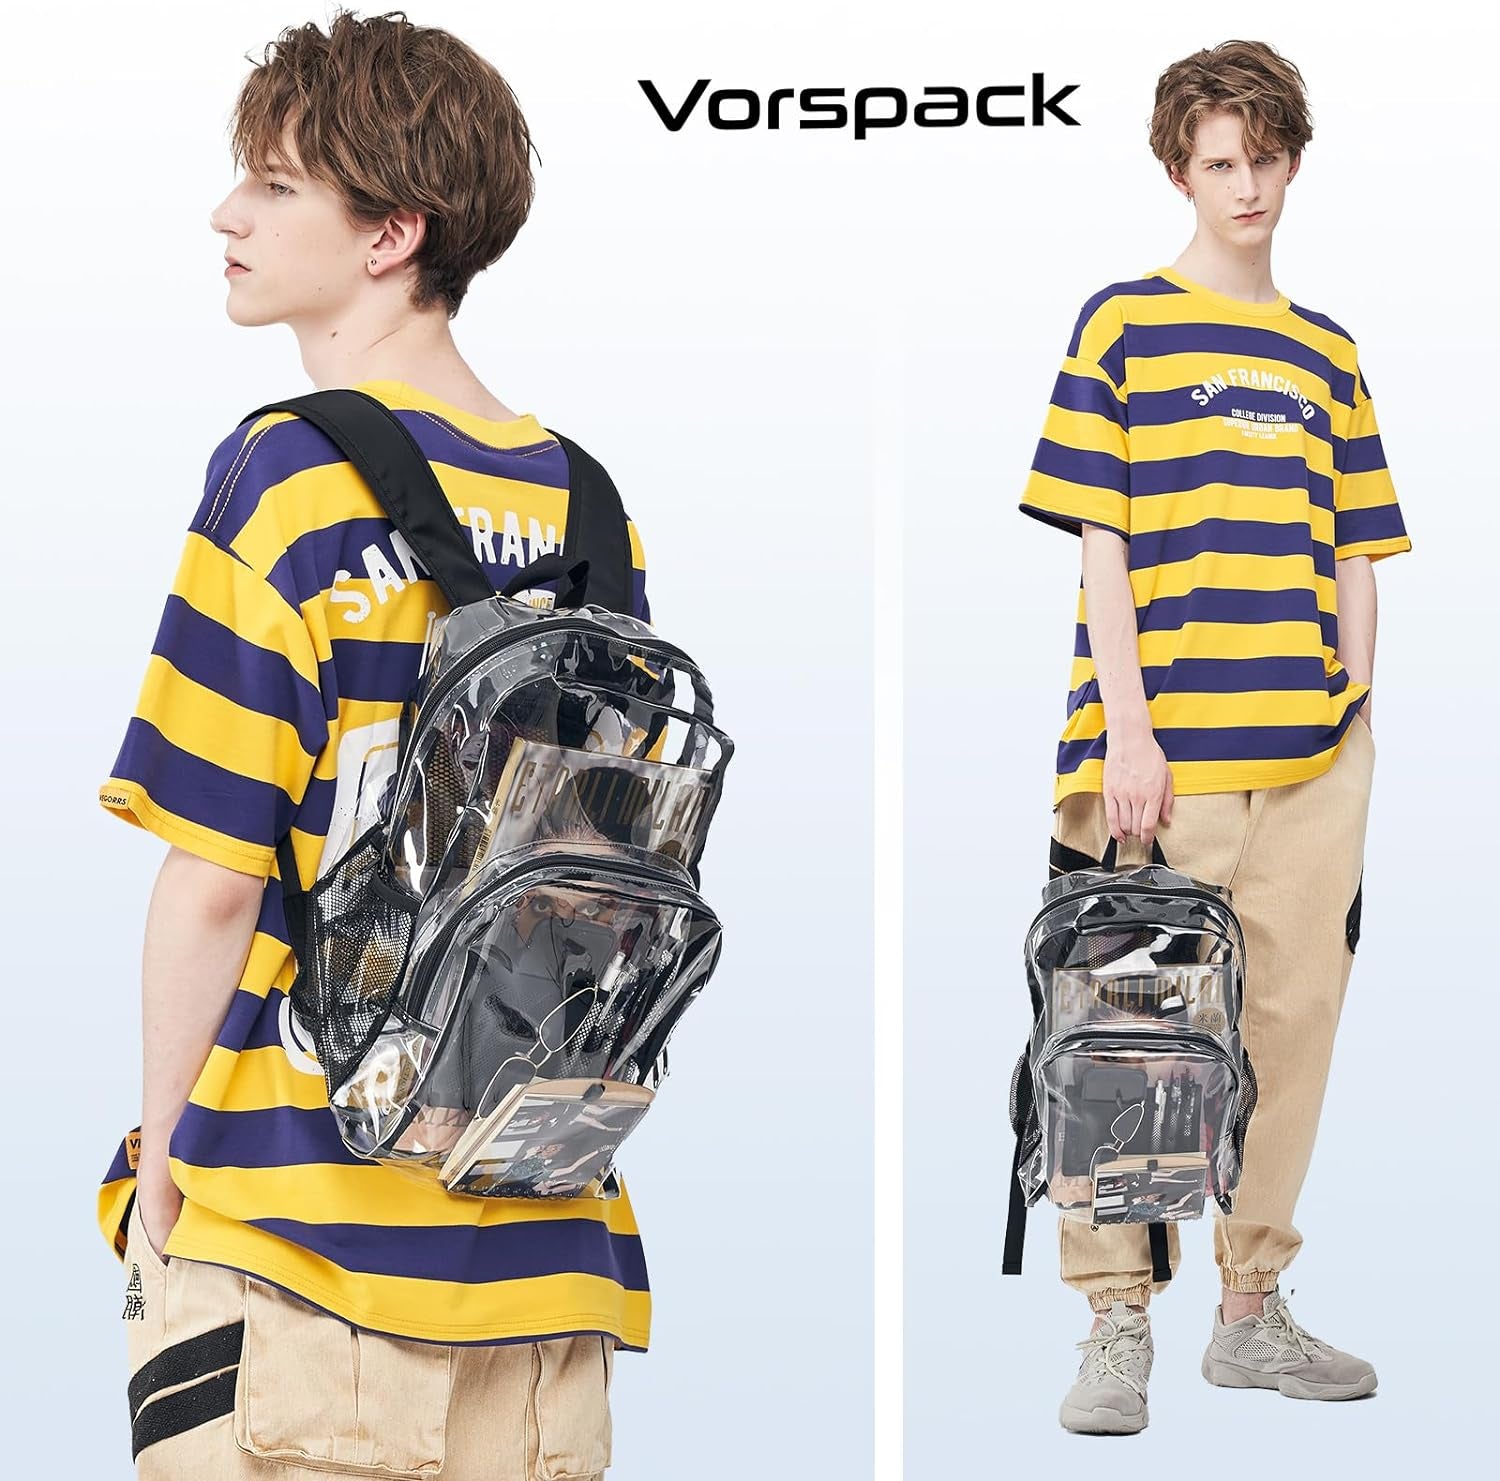 Clear Backpack Heavy Duty - PVC Transparent Backpack Large Clear Book Bag for College Work